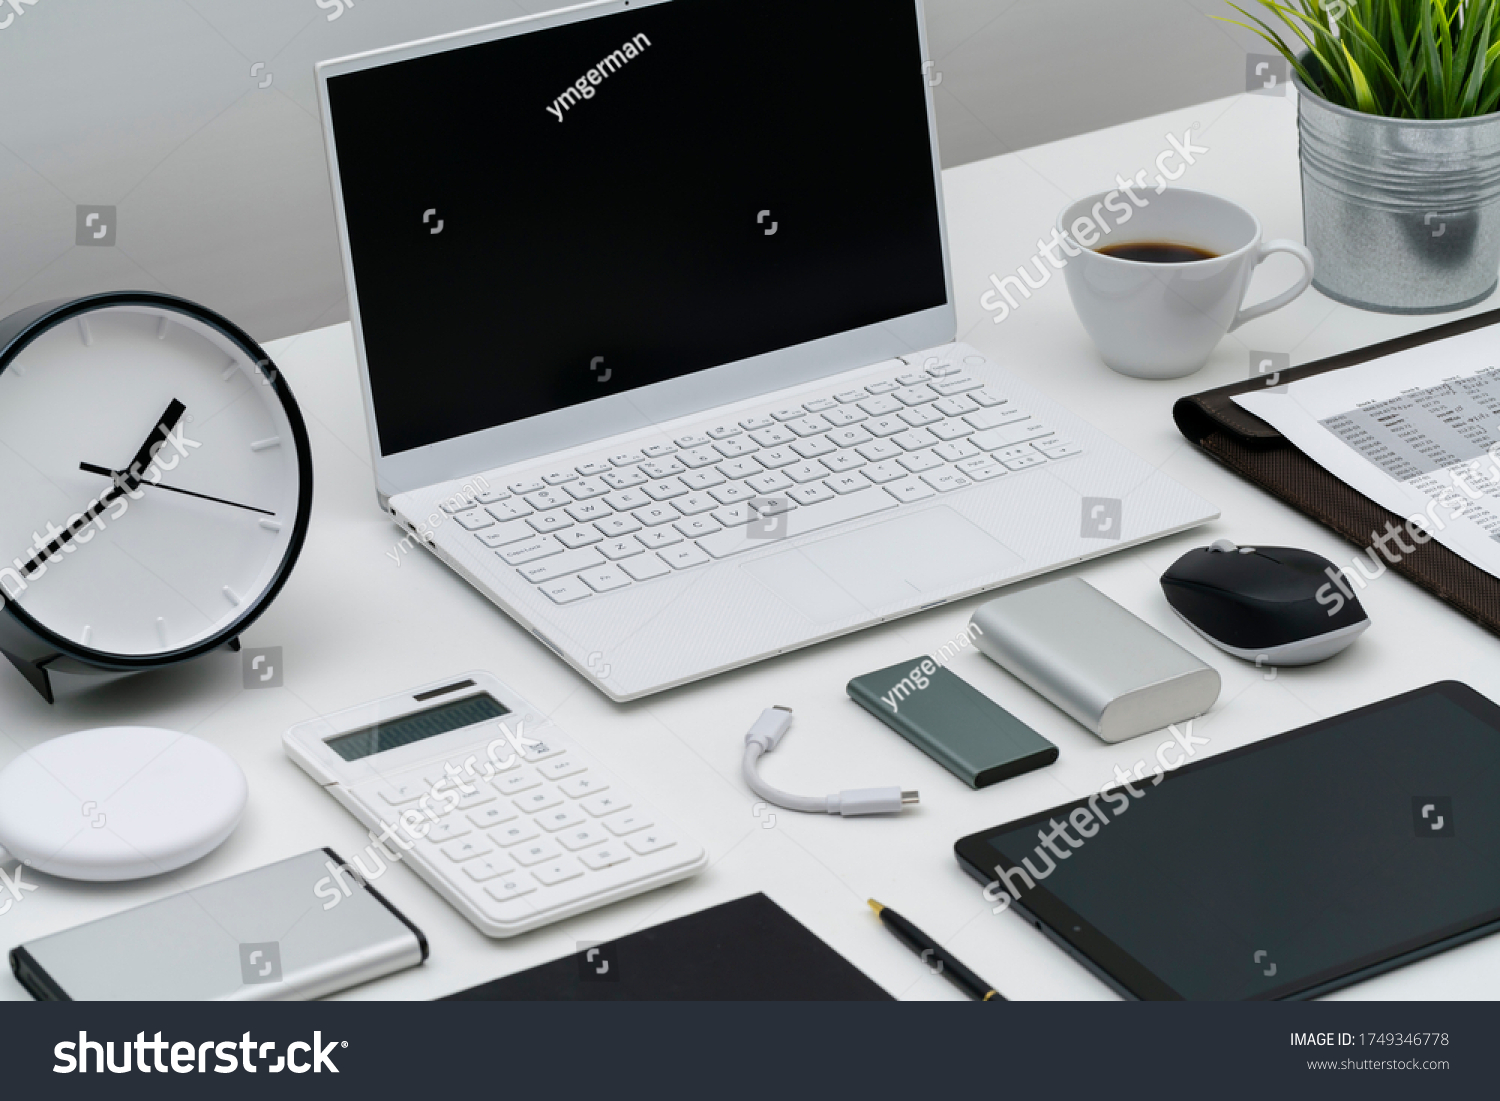 Flat lay of office desktop and gadgets at an angle #1749346778